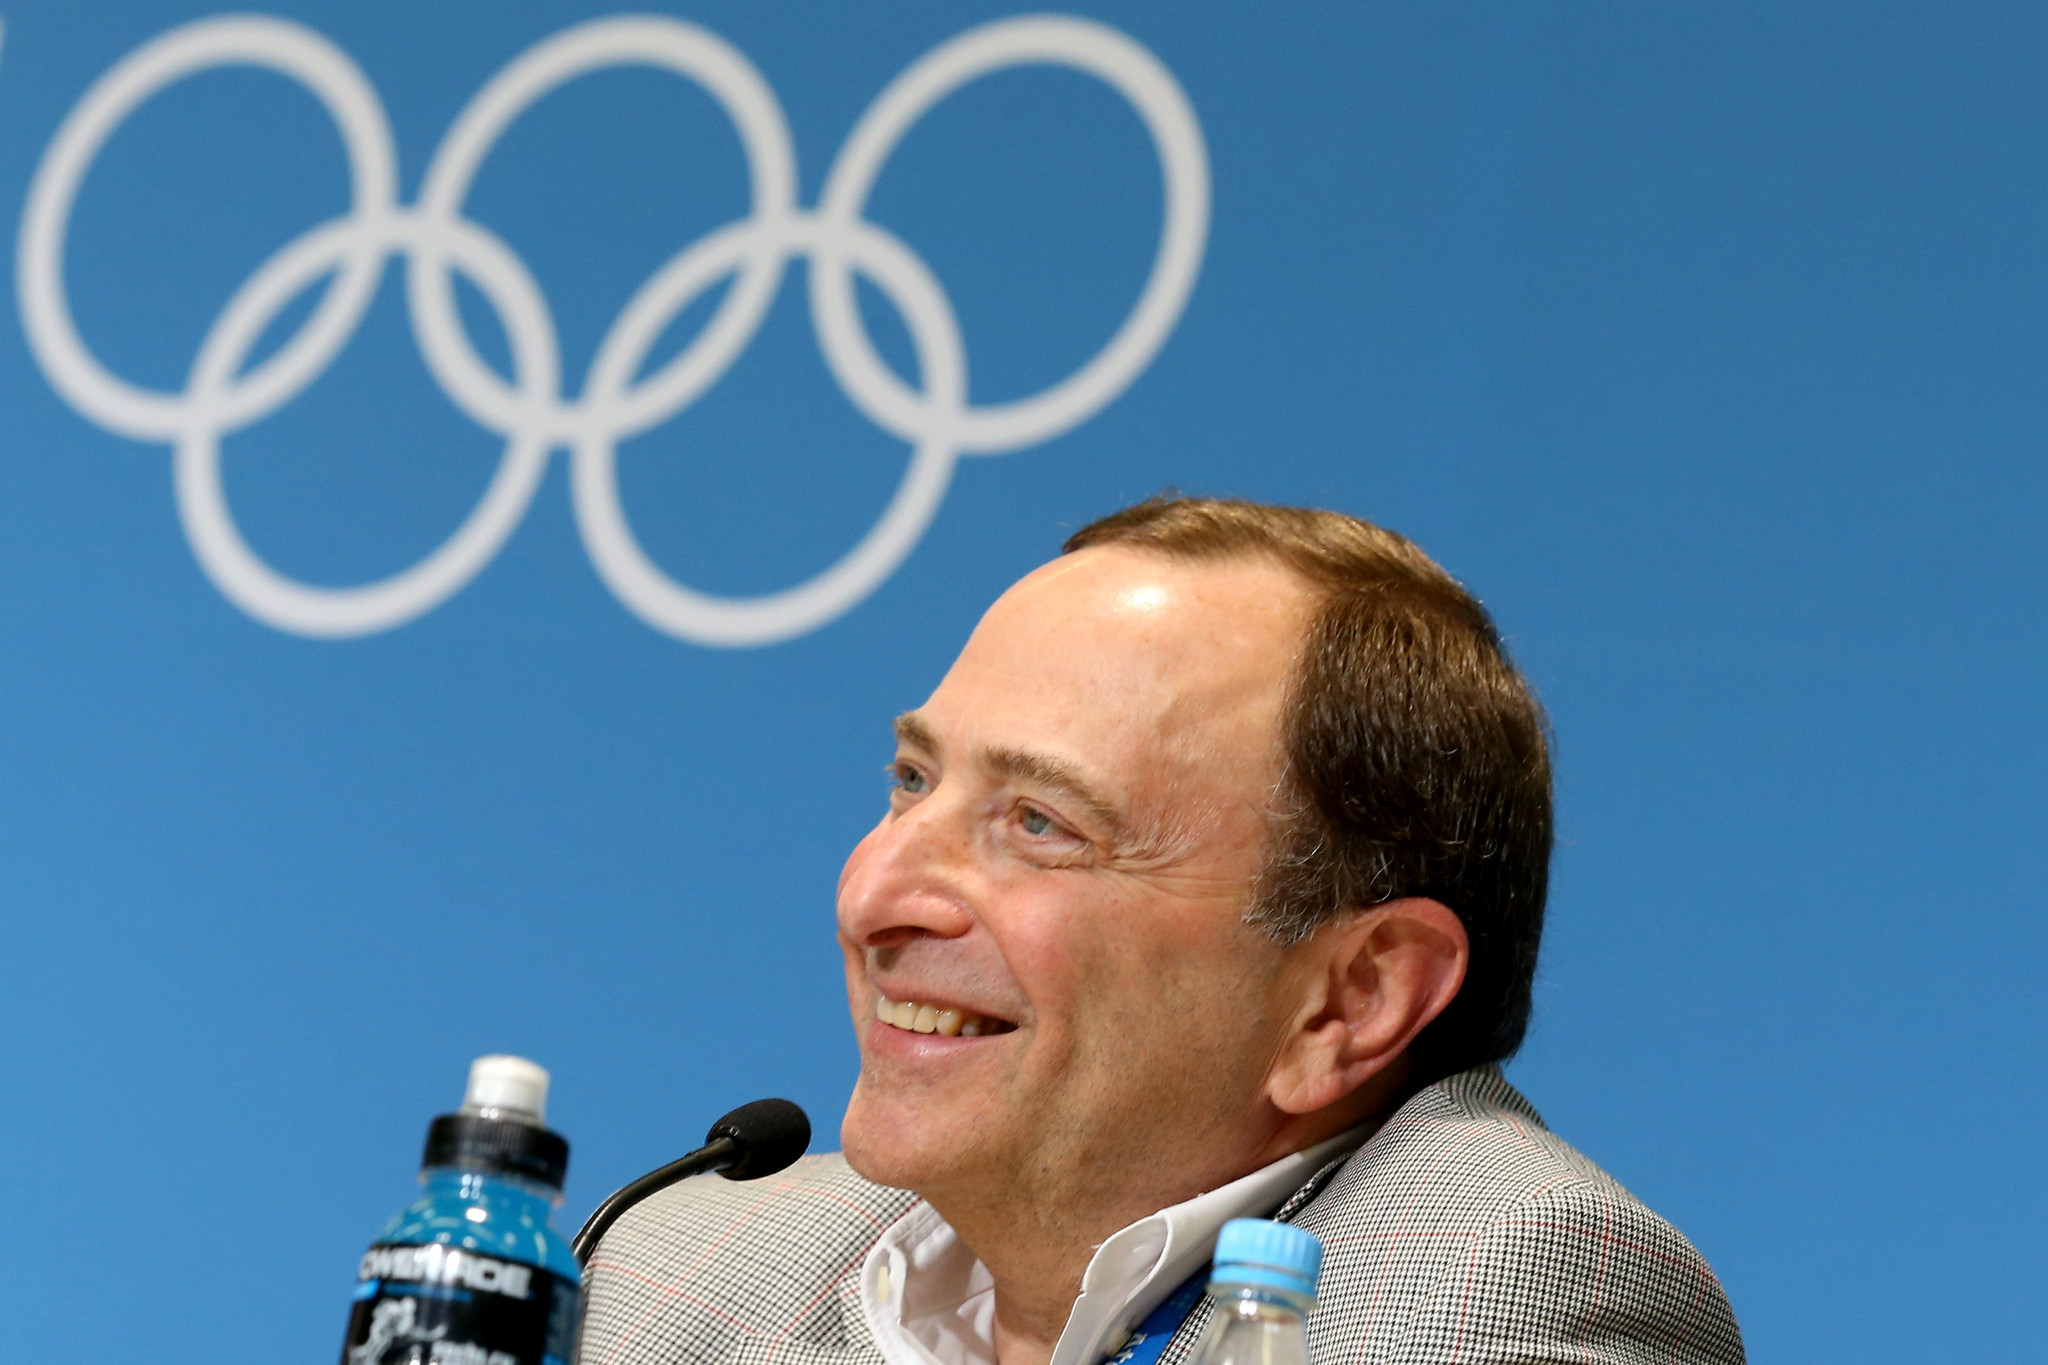 Gary Bettman is among the latest group of inductees to the Hockey Hall of Fame ©Getty Images